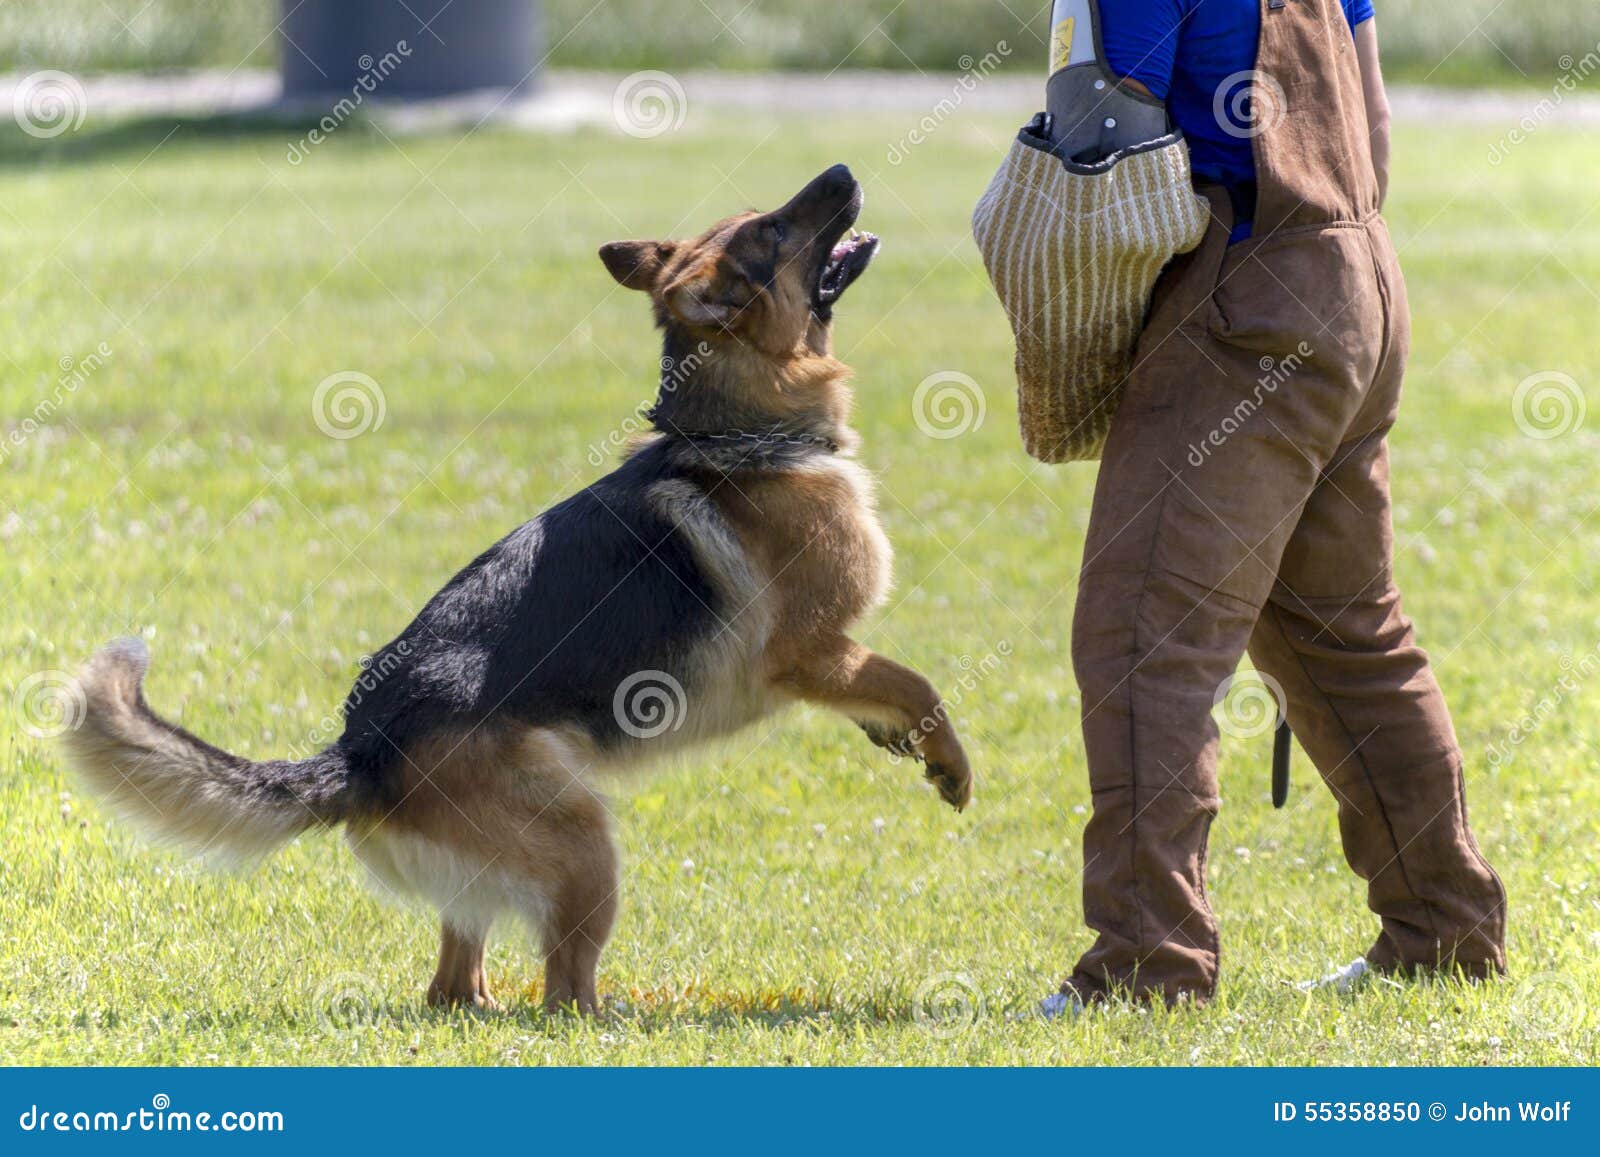 are police dogs trained in german